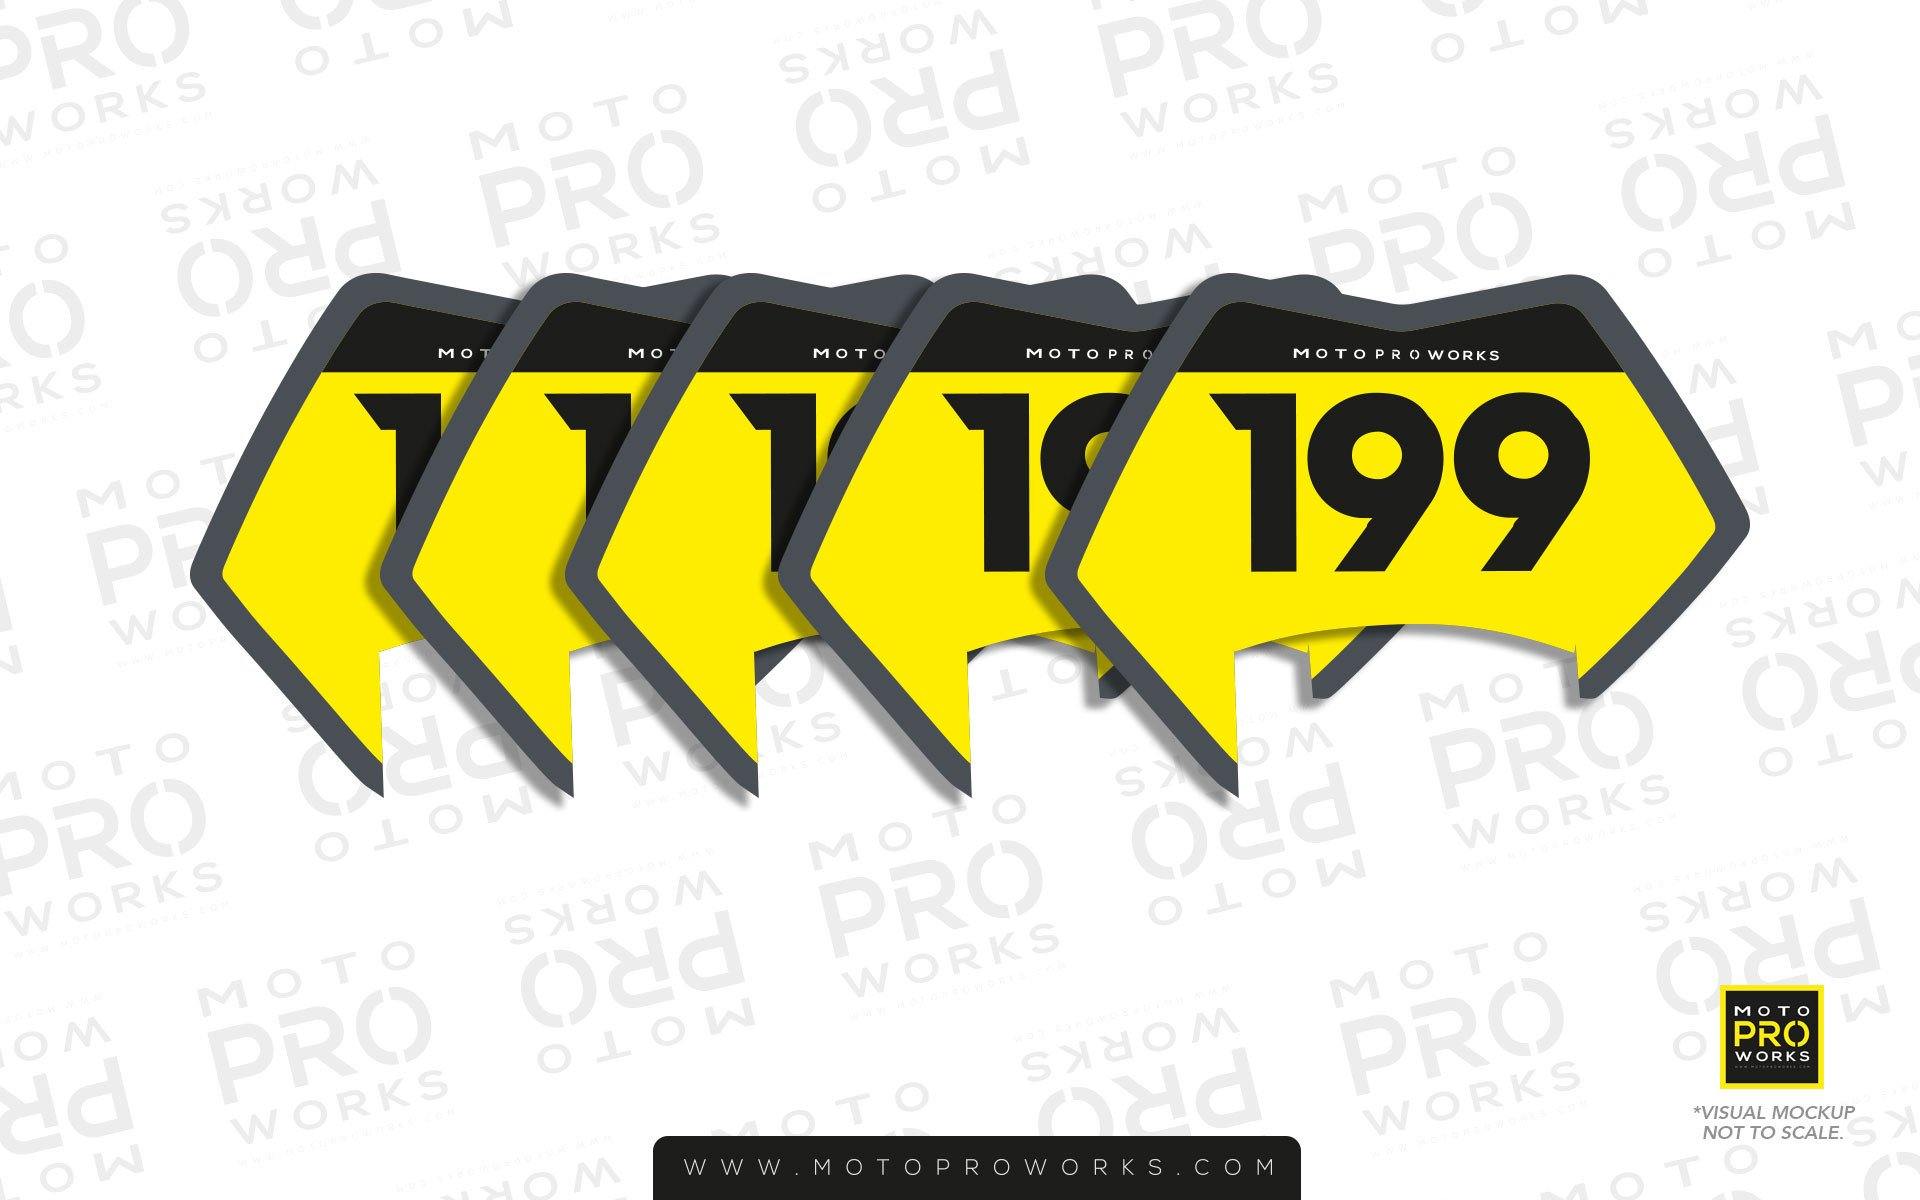 Individual ID Stickers - "Mini MX Badges" - MotoProWorks | Decals and Bike Graphic kit